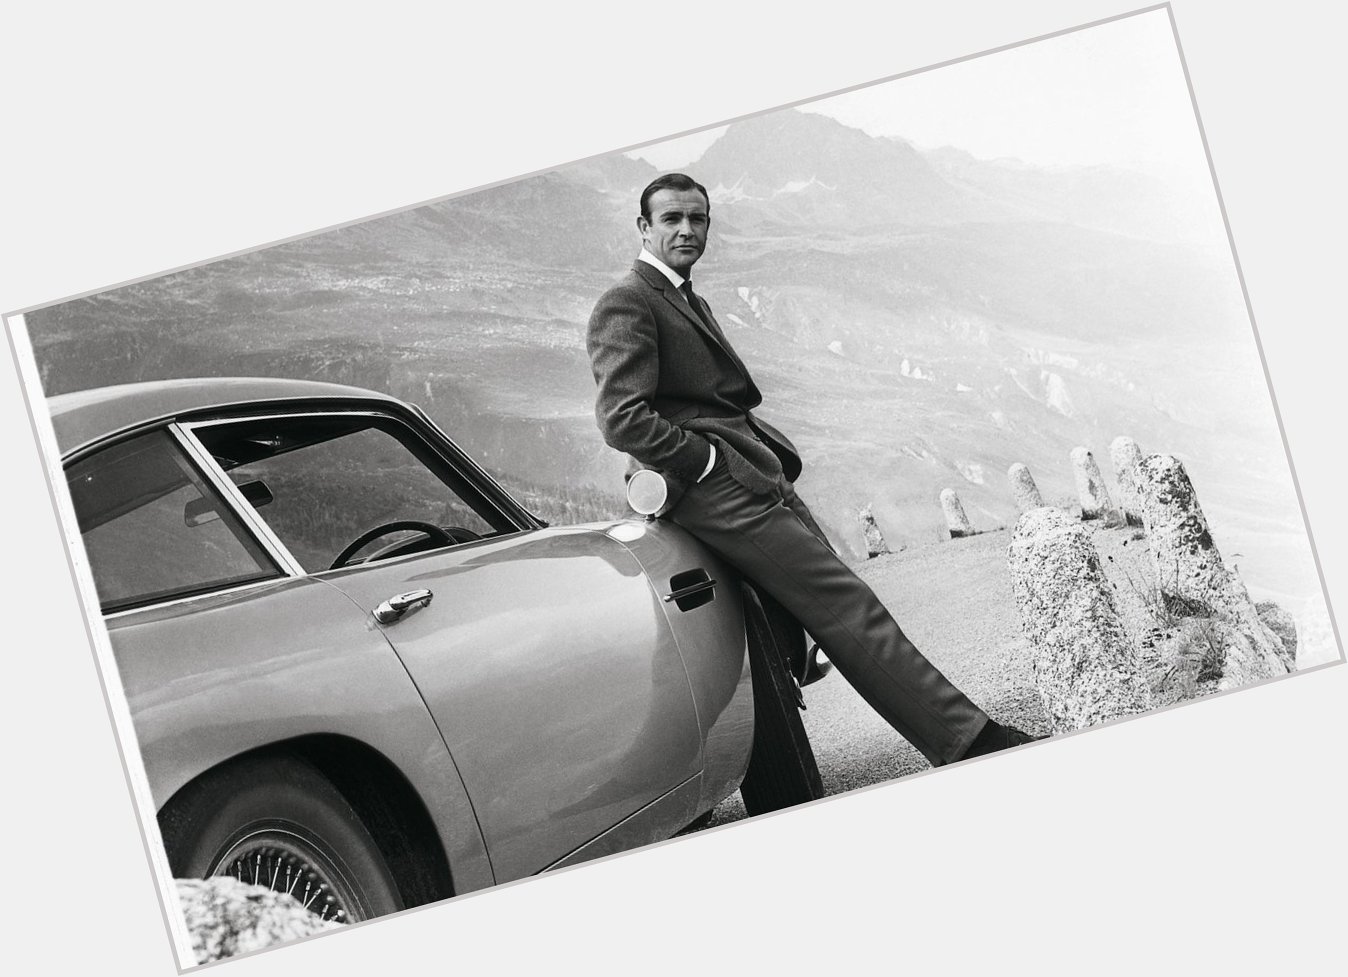 Wishing Sean Connery a very Happy 90th Birthday!

What\s your favourite Connery/DB5 moment? 